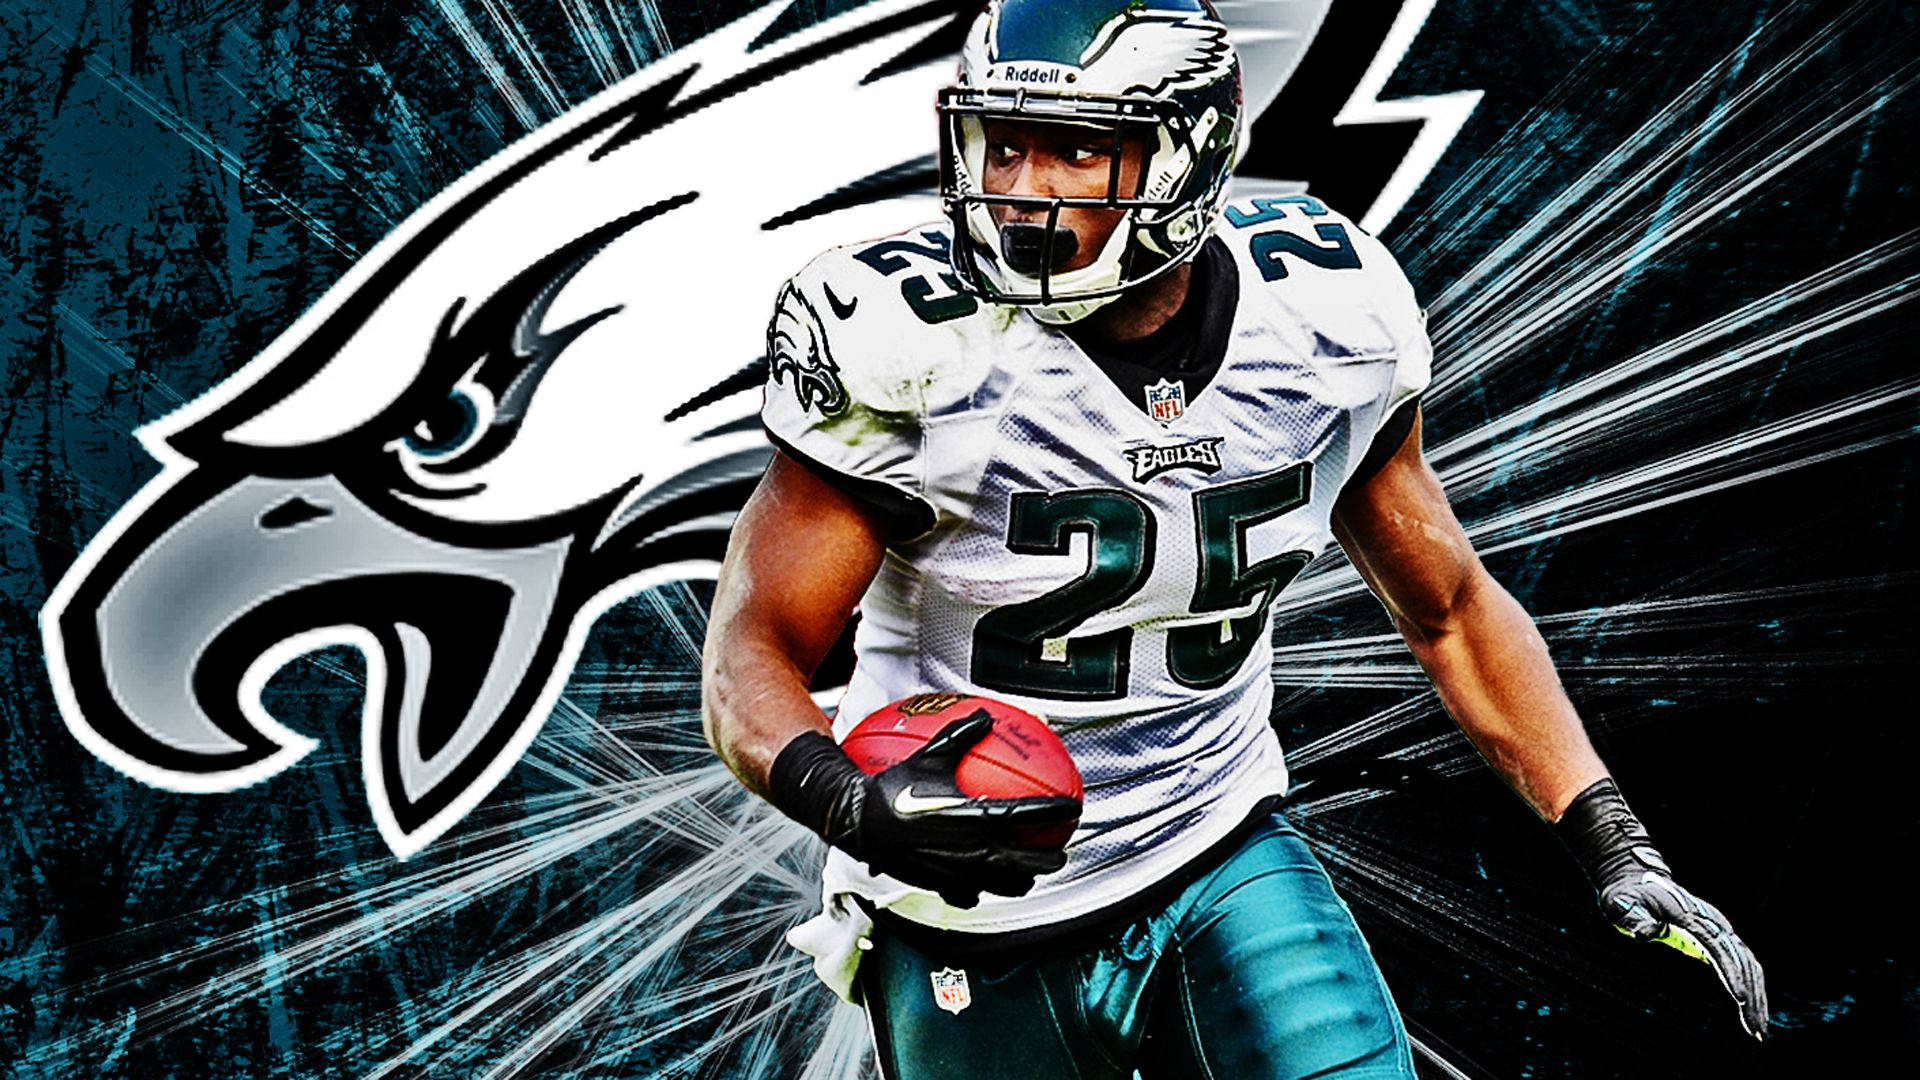 The nfl the eagles HD wallpapers